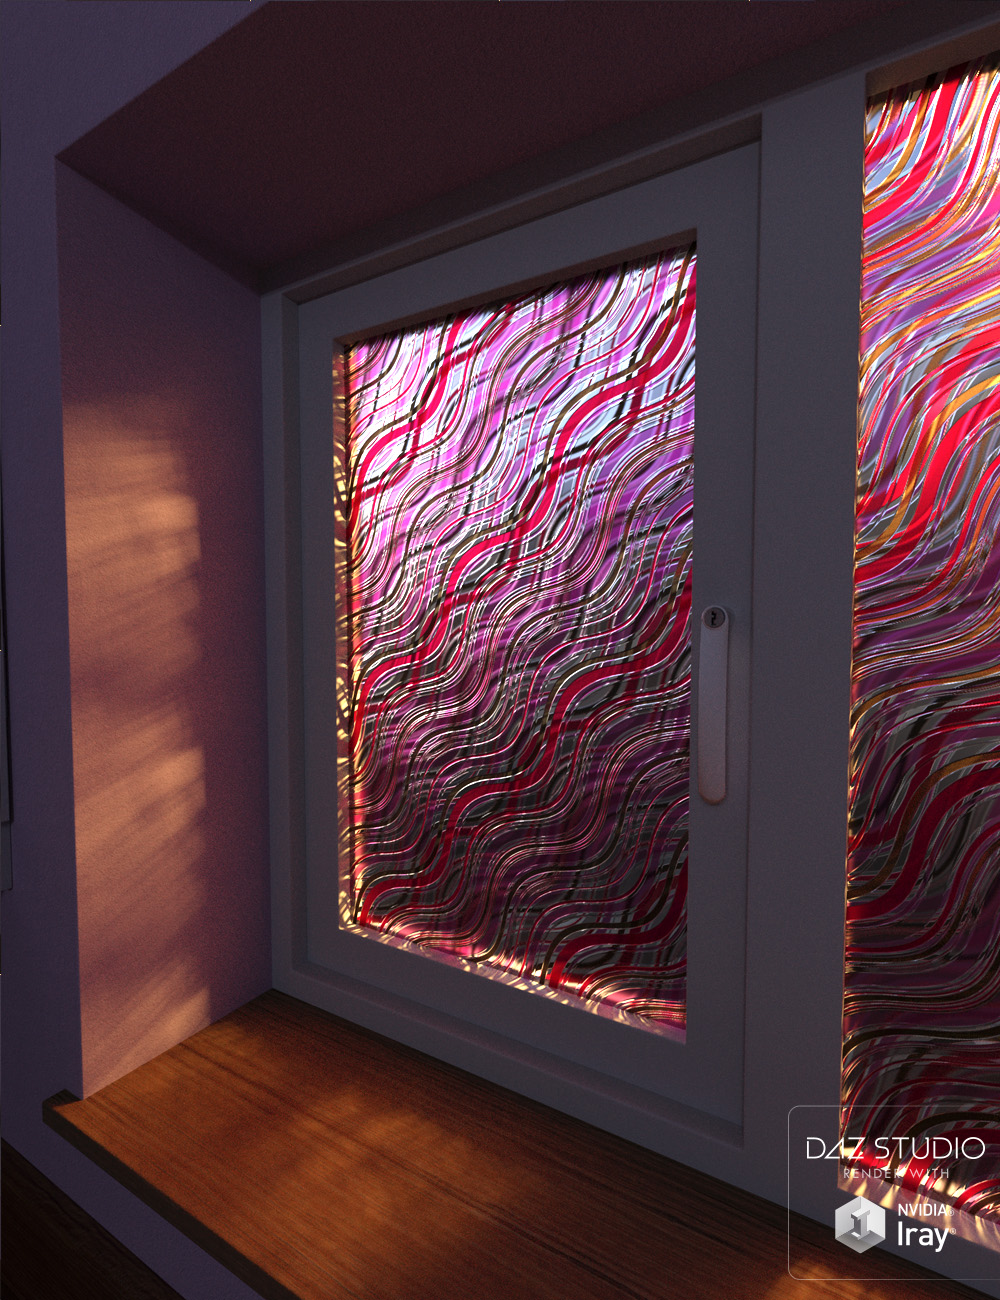 Privacy Glass Iray Shaders by: ForbiddenWhispers, 3D Models by Daz 3D